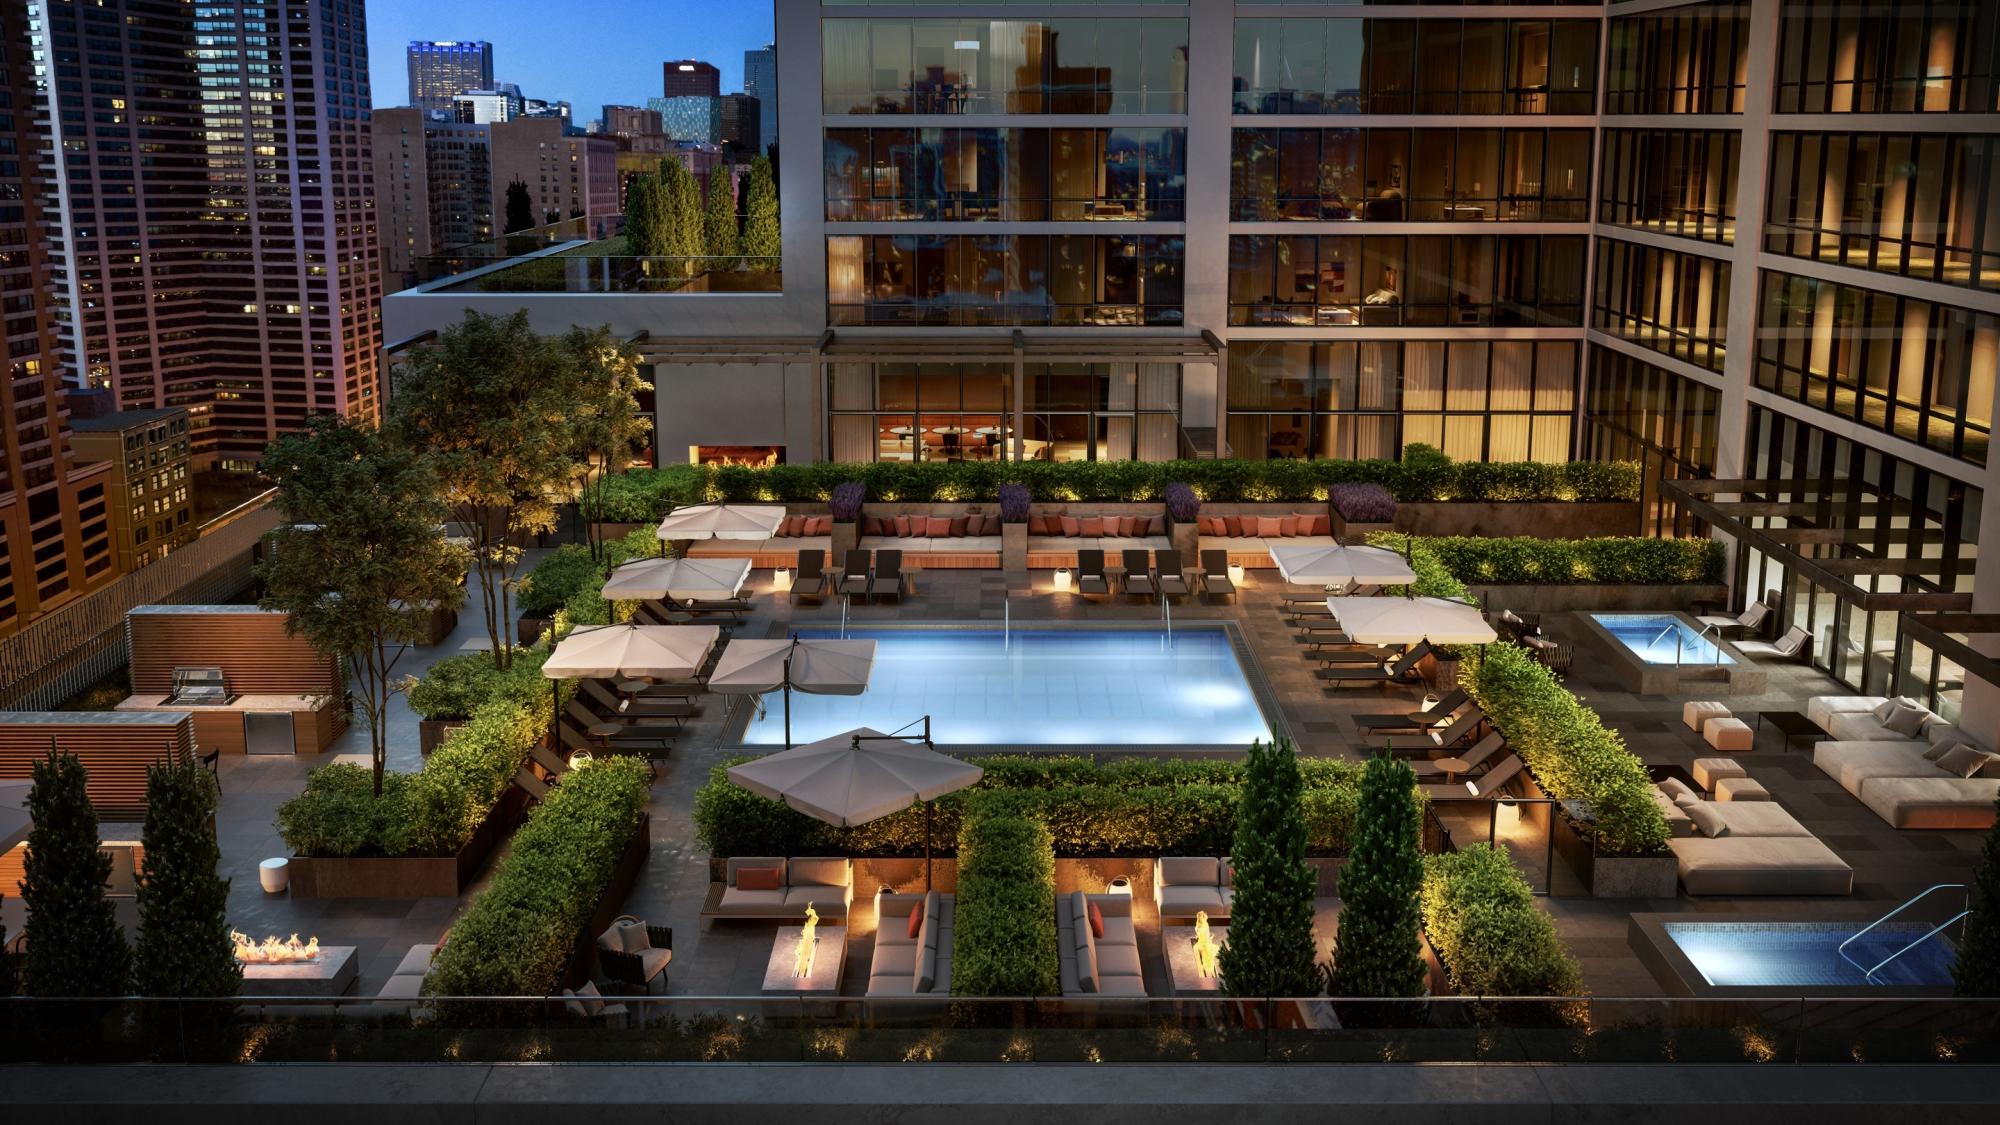 NEMA luxury apartments in Chicago have over 70,000 square feet in amenities.